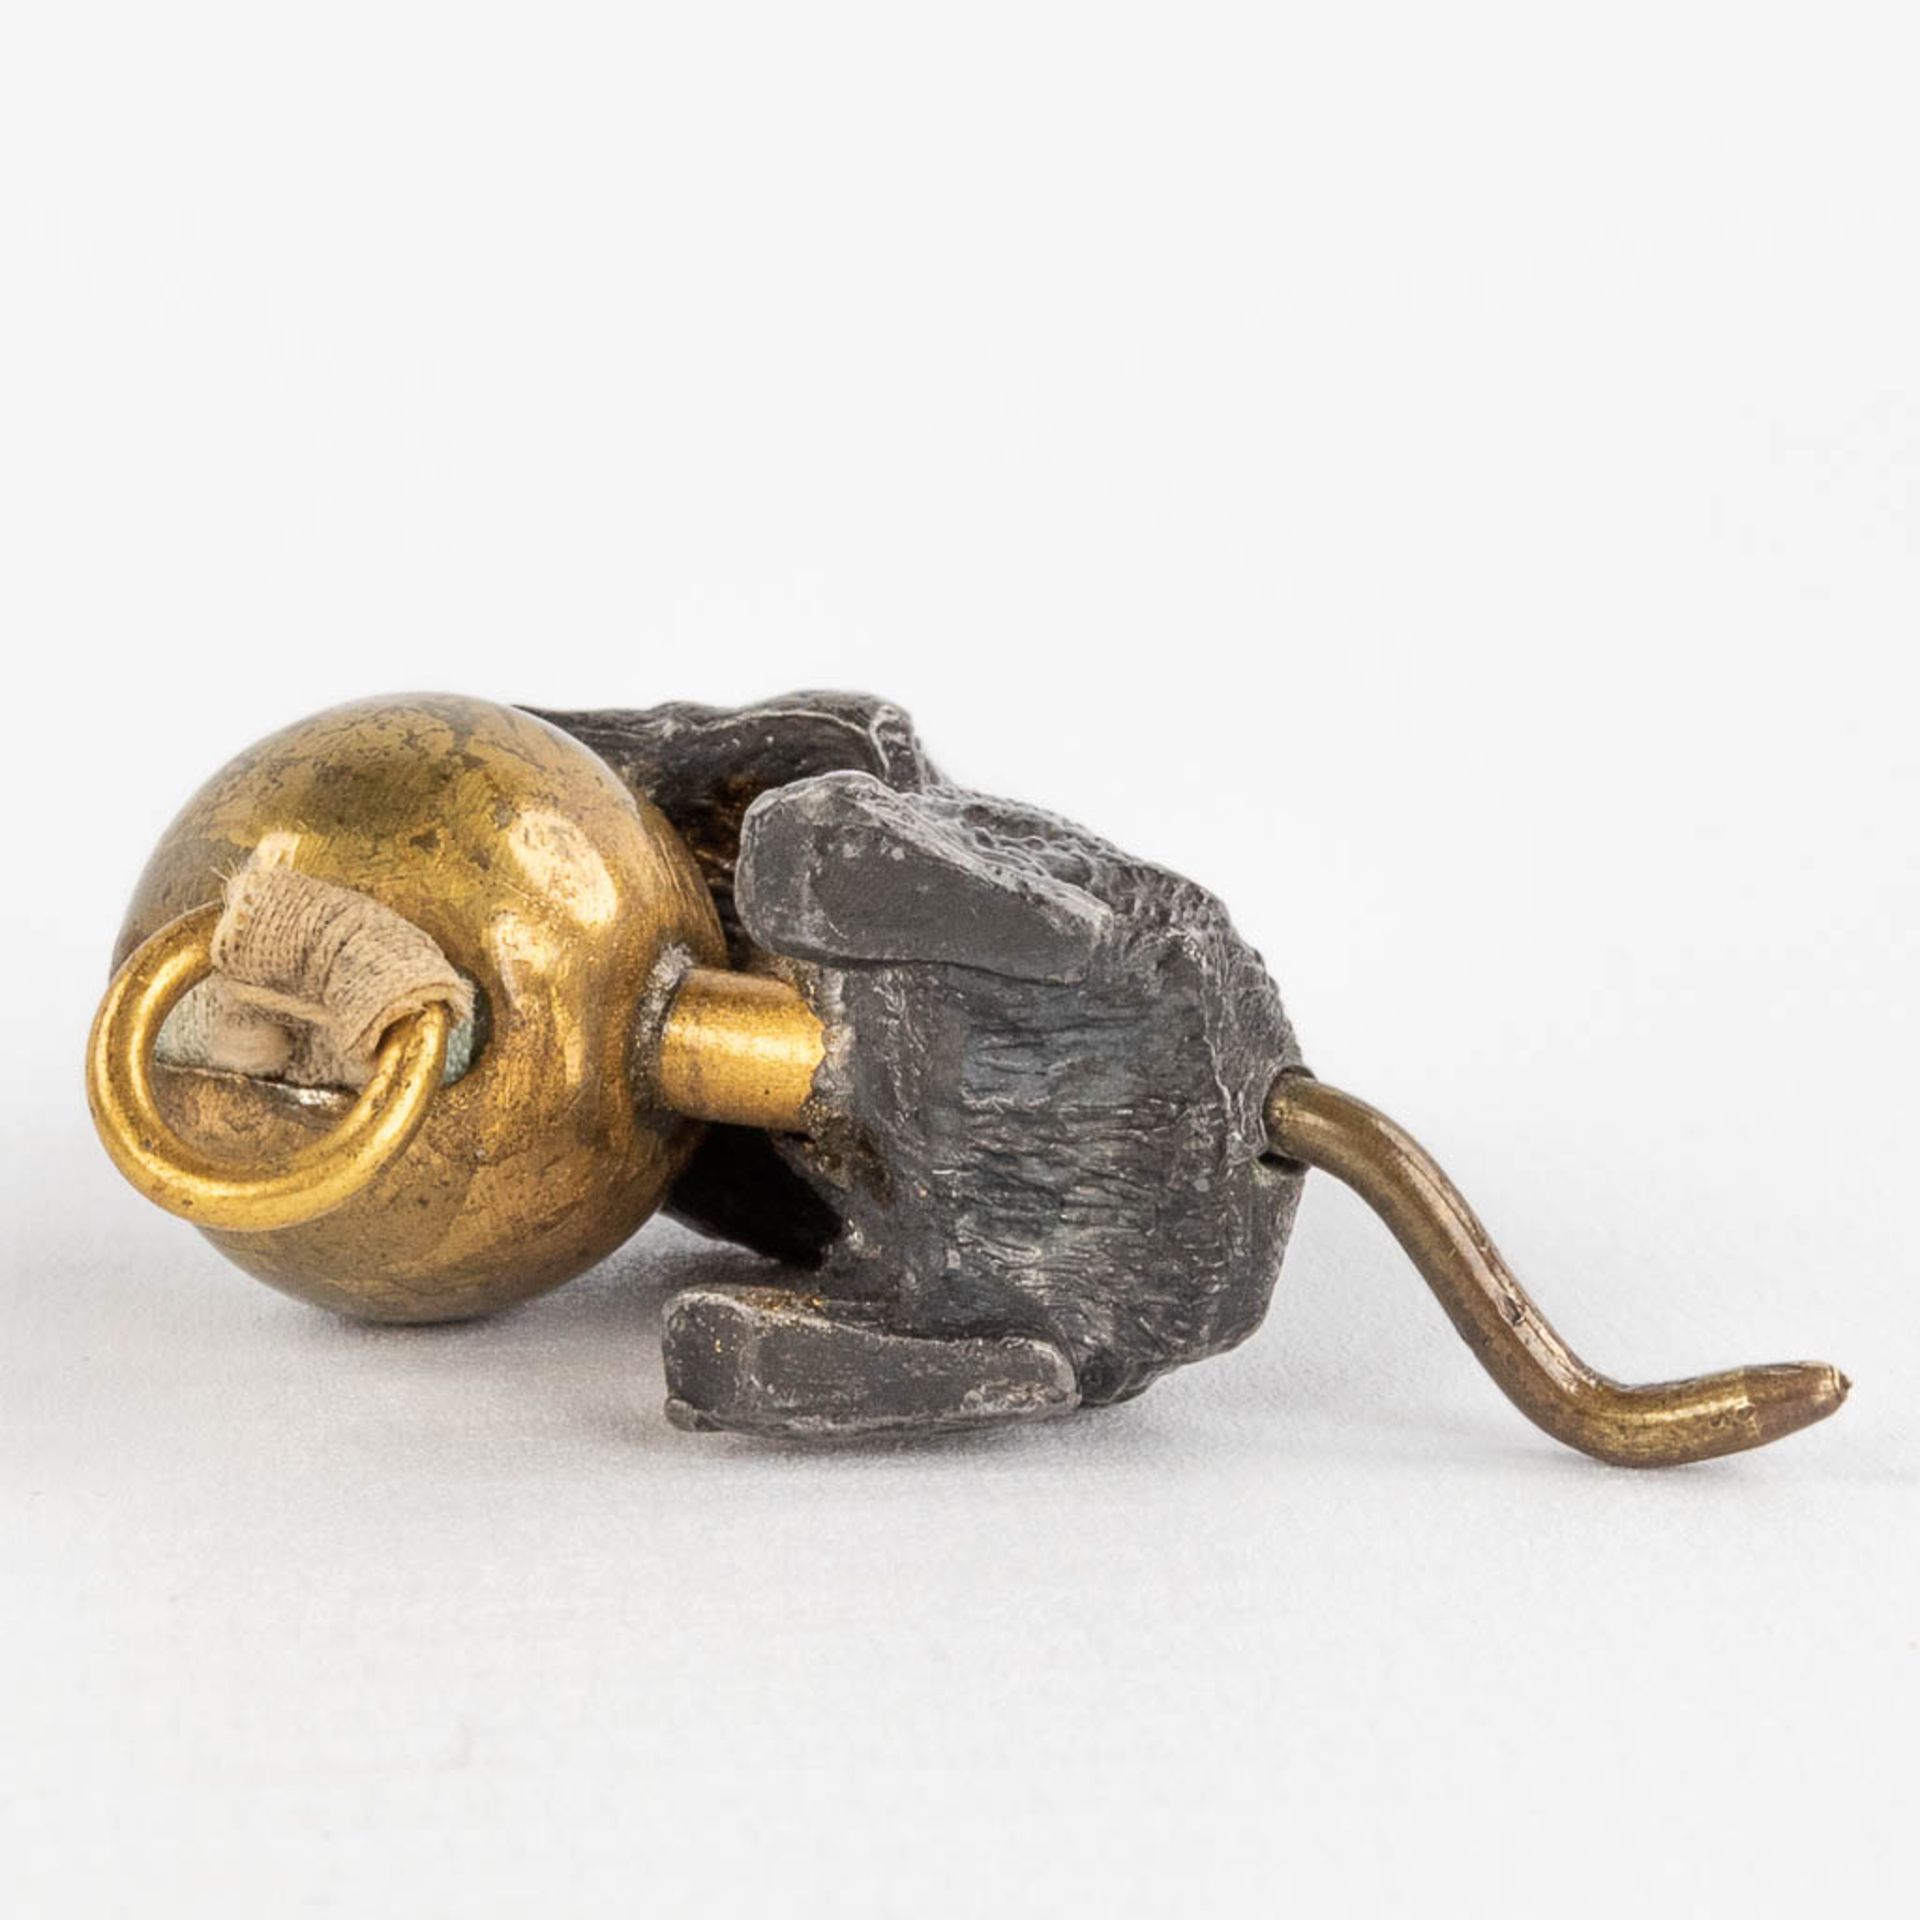 An antique tape measure, in the shape of a cat with a ball, Vienna bronze. 19th century. (H: 4,2 cm) - Image 10 of 18